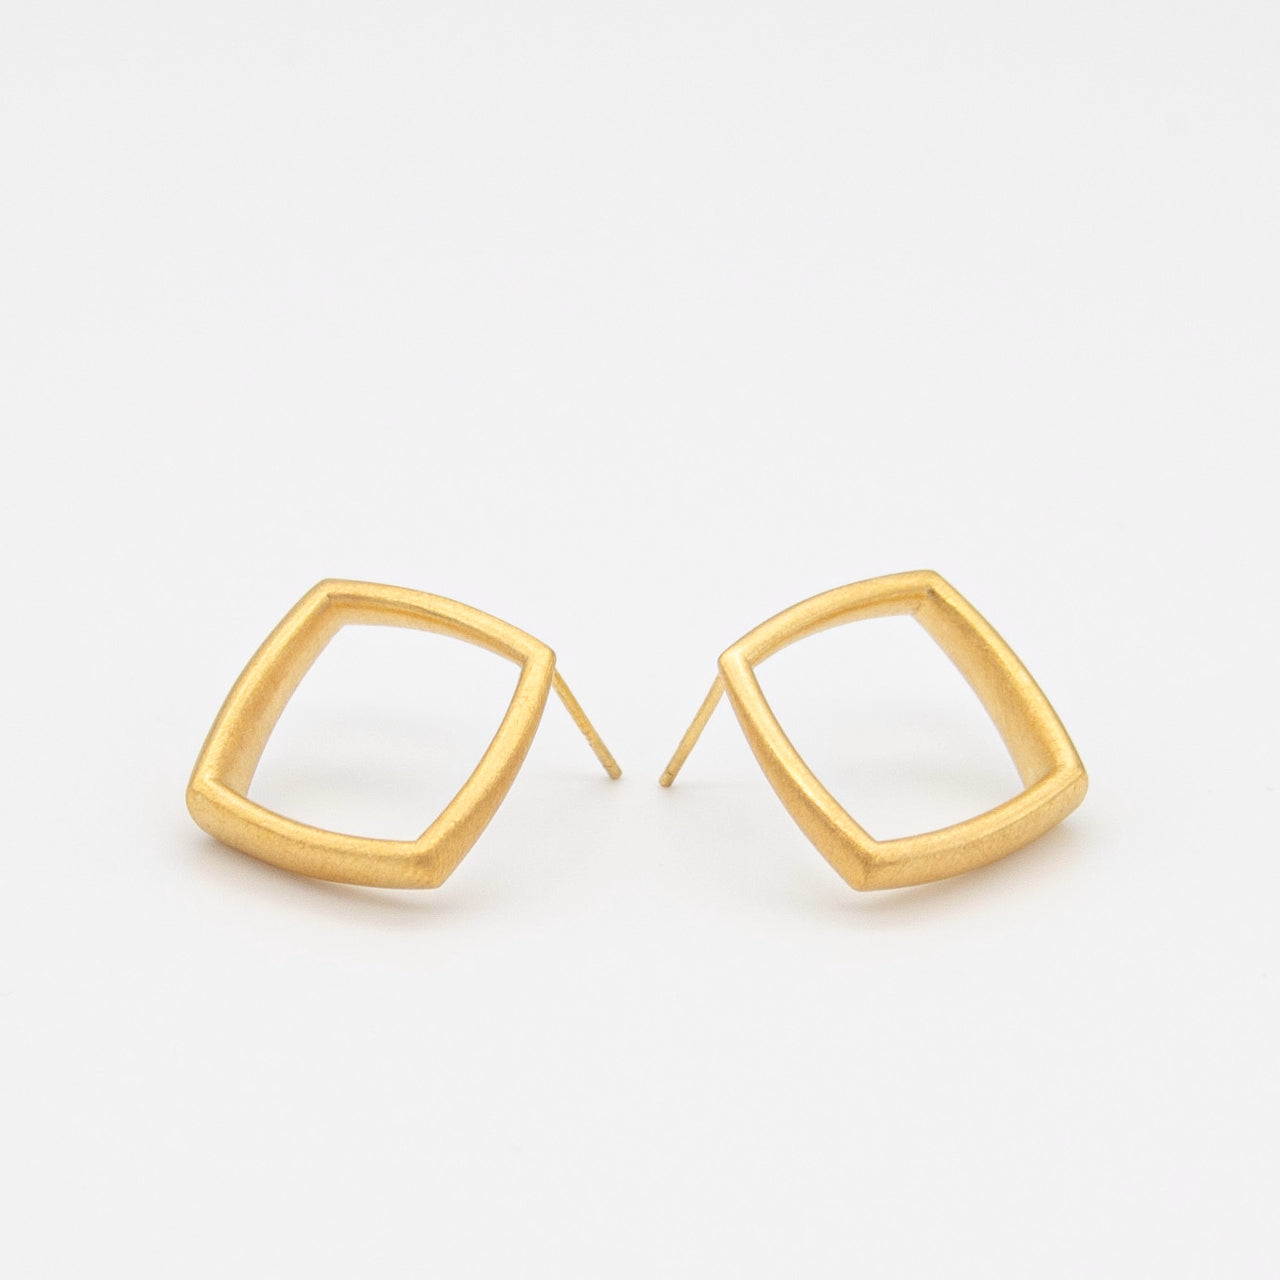 Curved Curves Rhombus Earrings Gold